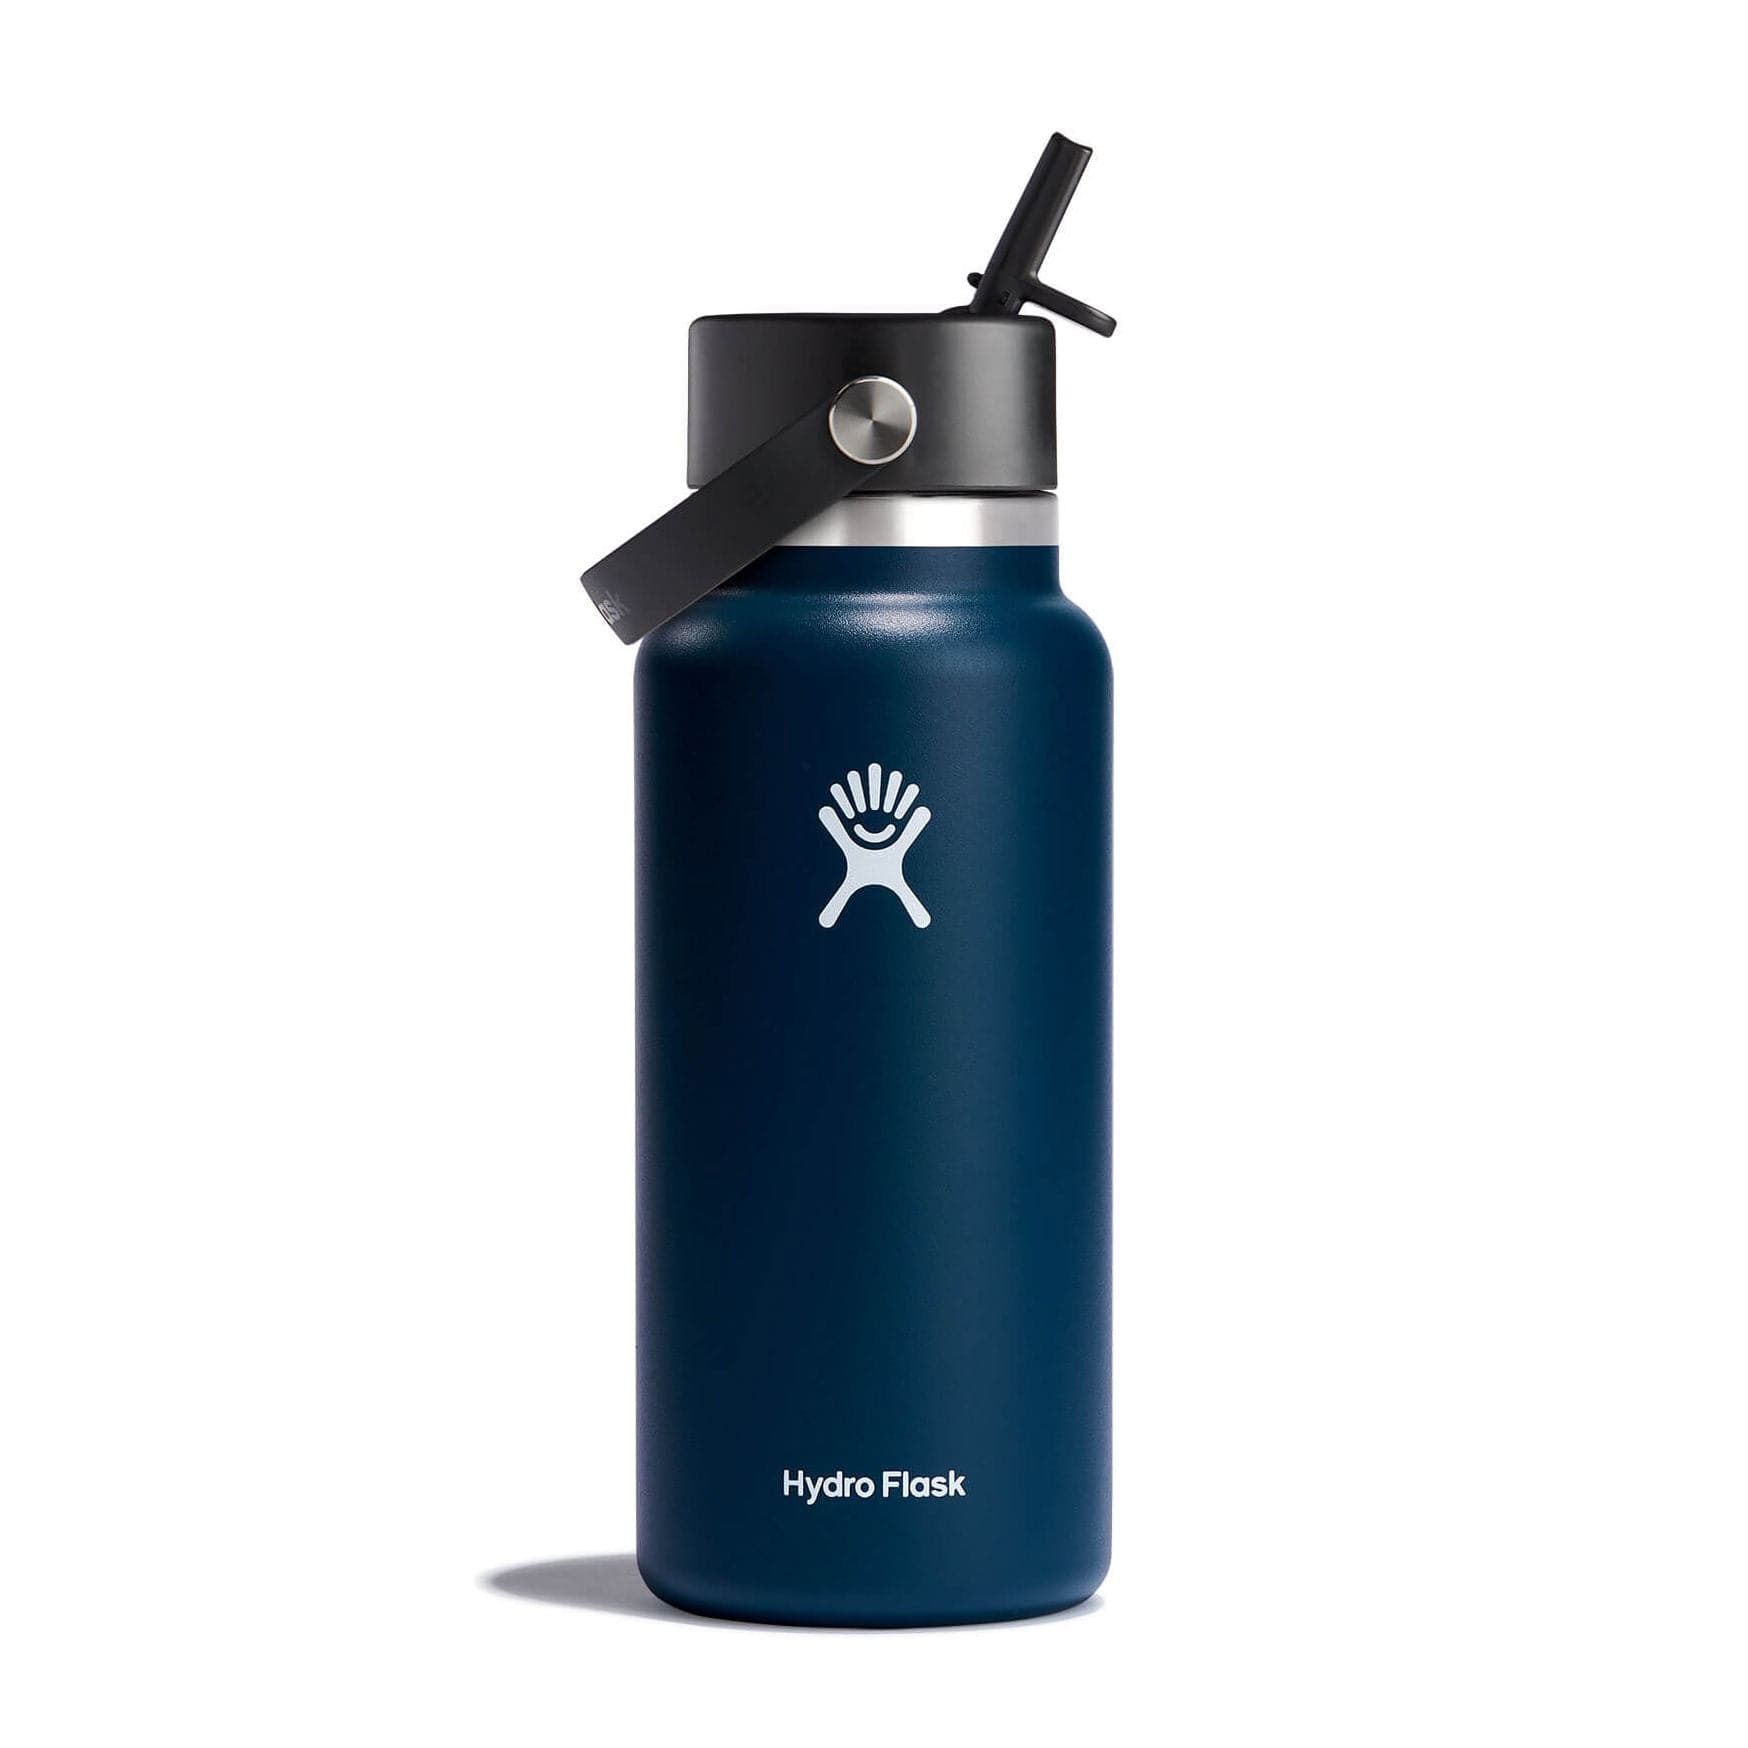 Hydro Flask: 'Baby, it's cold inside', Features